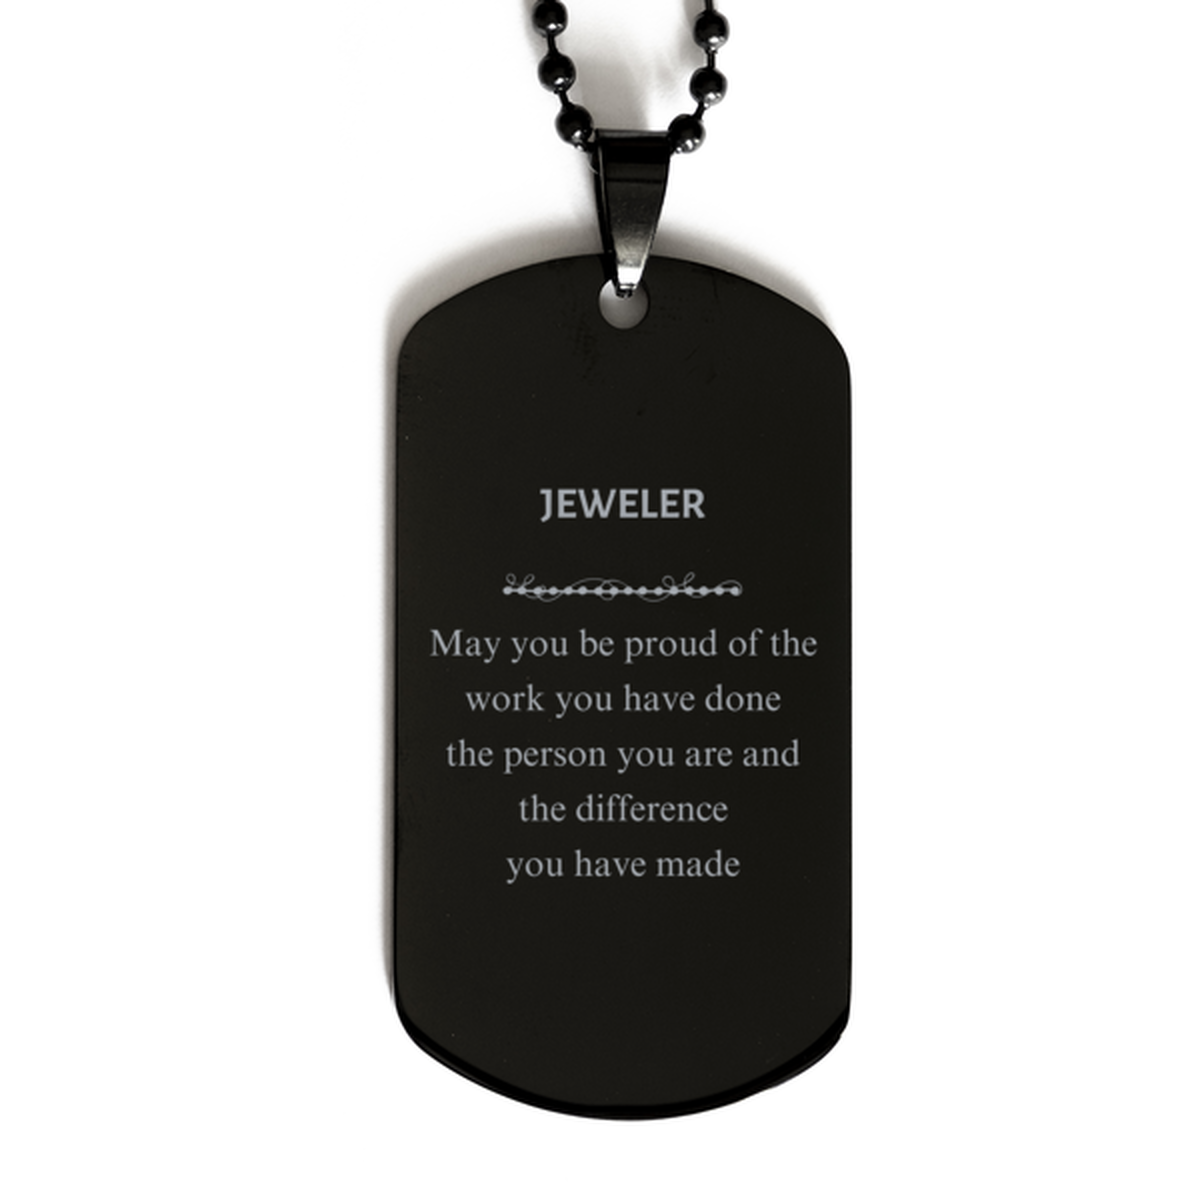 Jeweler May you be proud of the work you have done, Retirement Jeweler Black Dog Tag for Colleague Appreciation Gifts Amazing for Jeweler